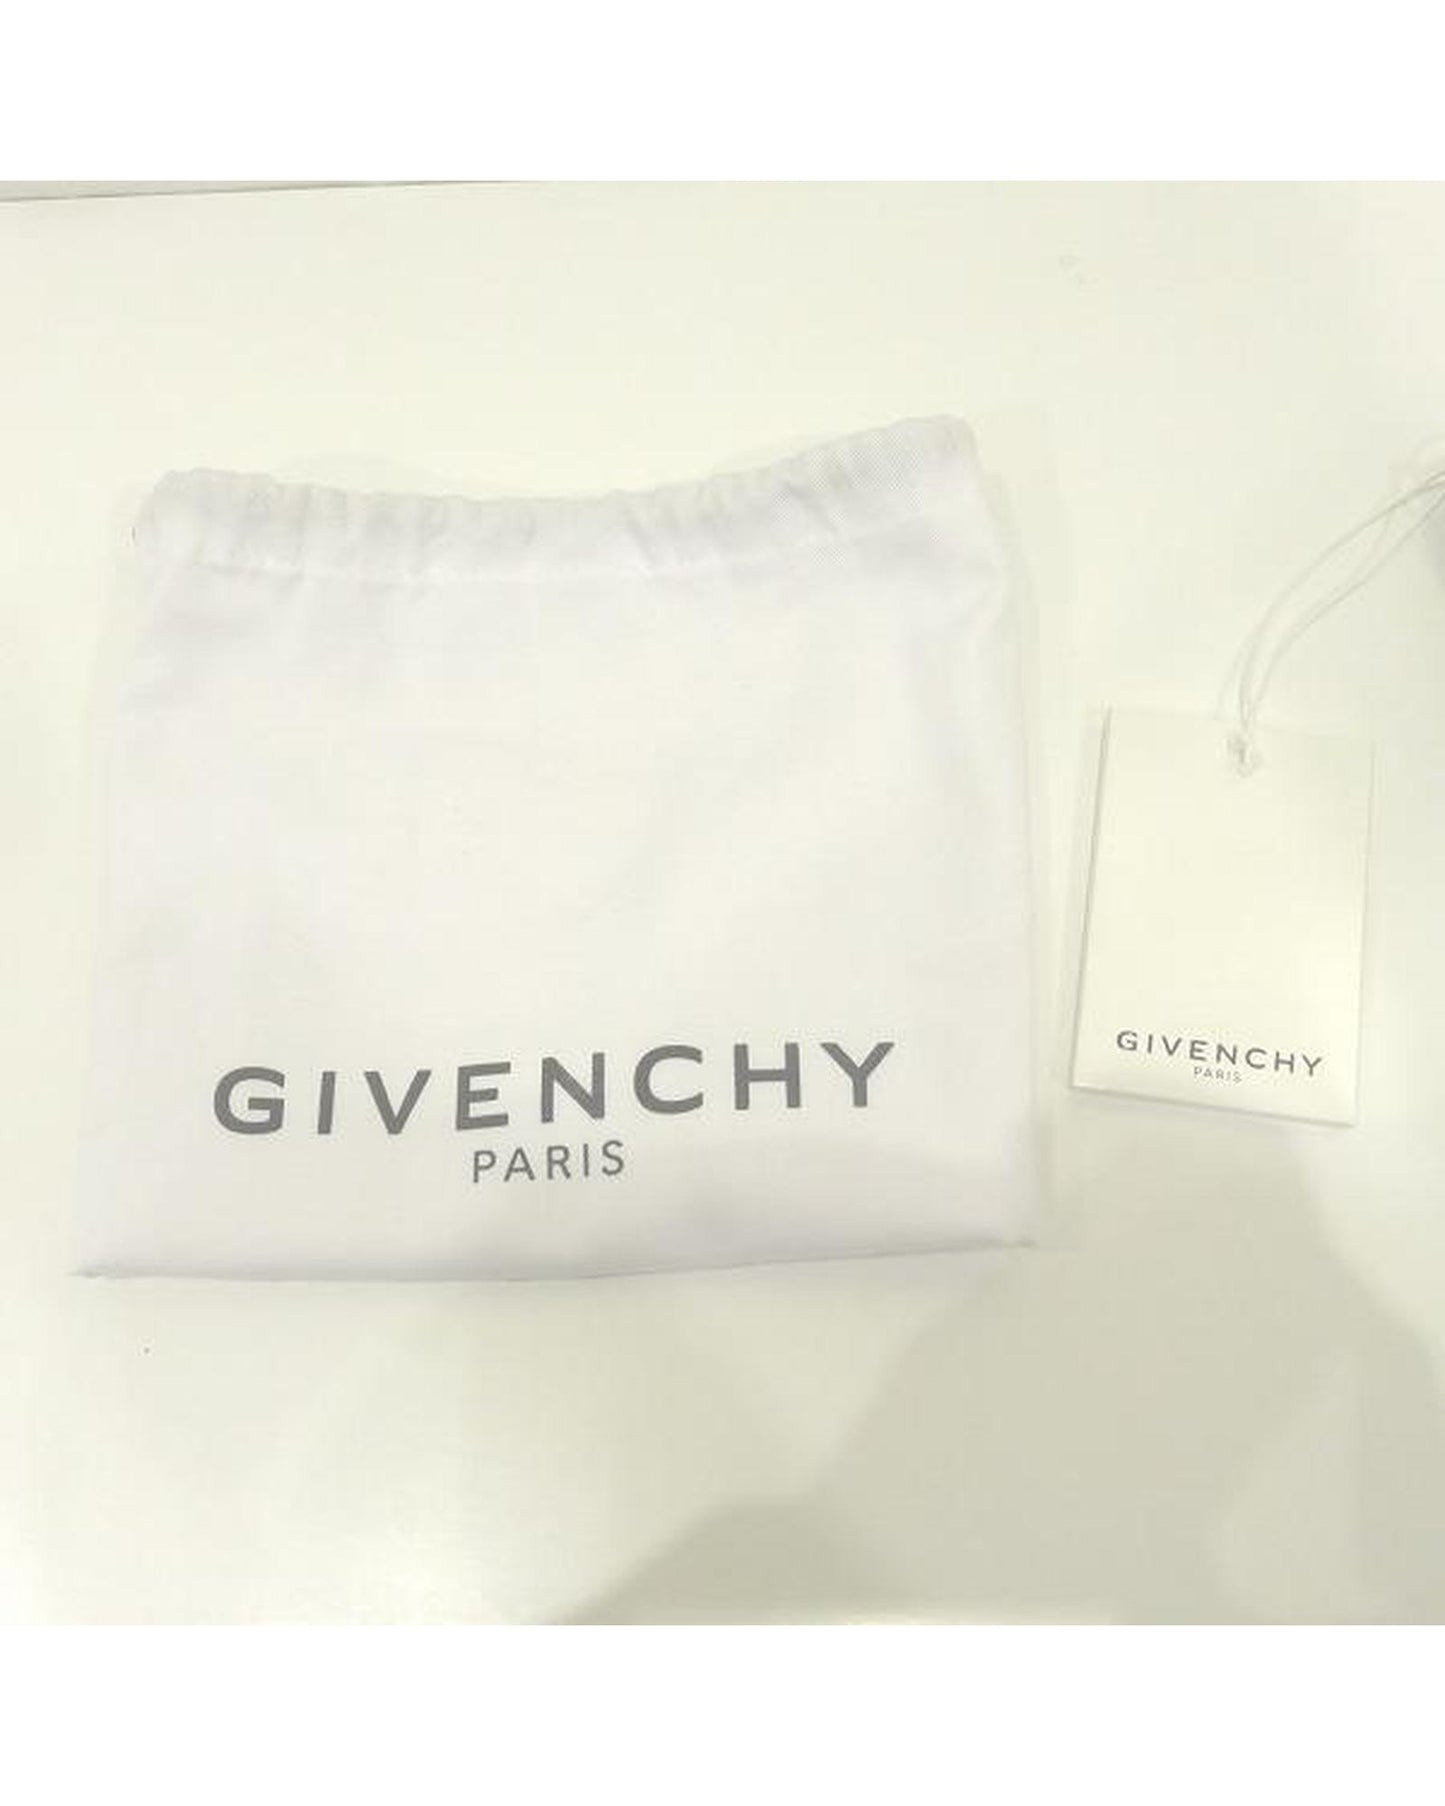 Givenchy Women's Givenchy Bug Waist Bag in Black Leather in Black